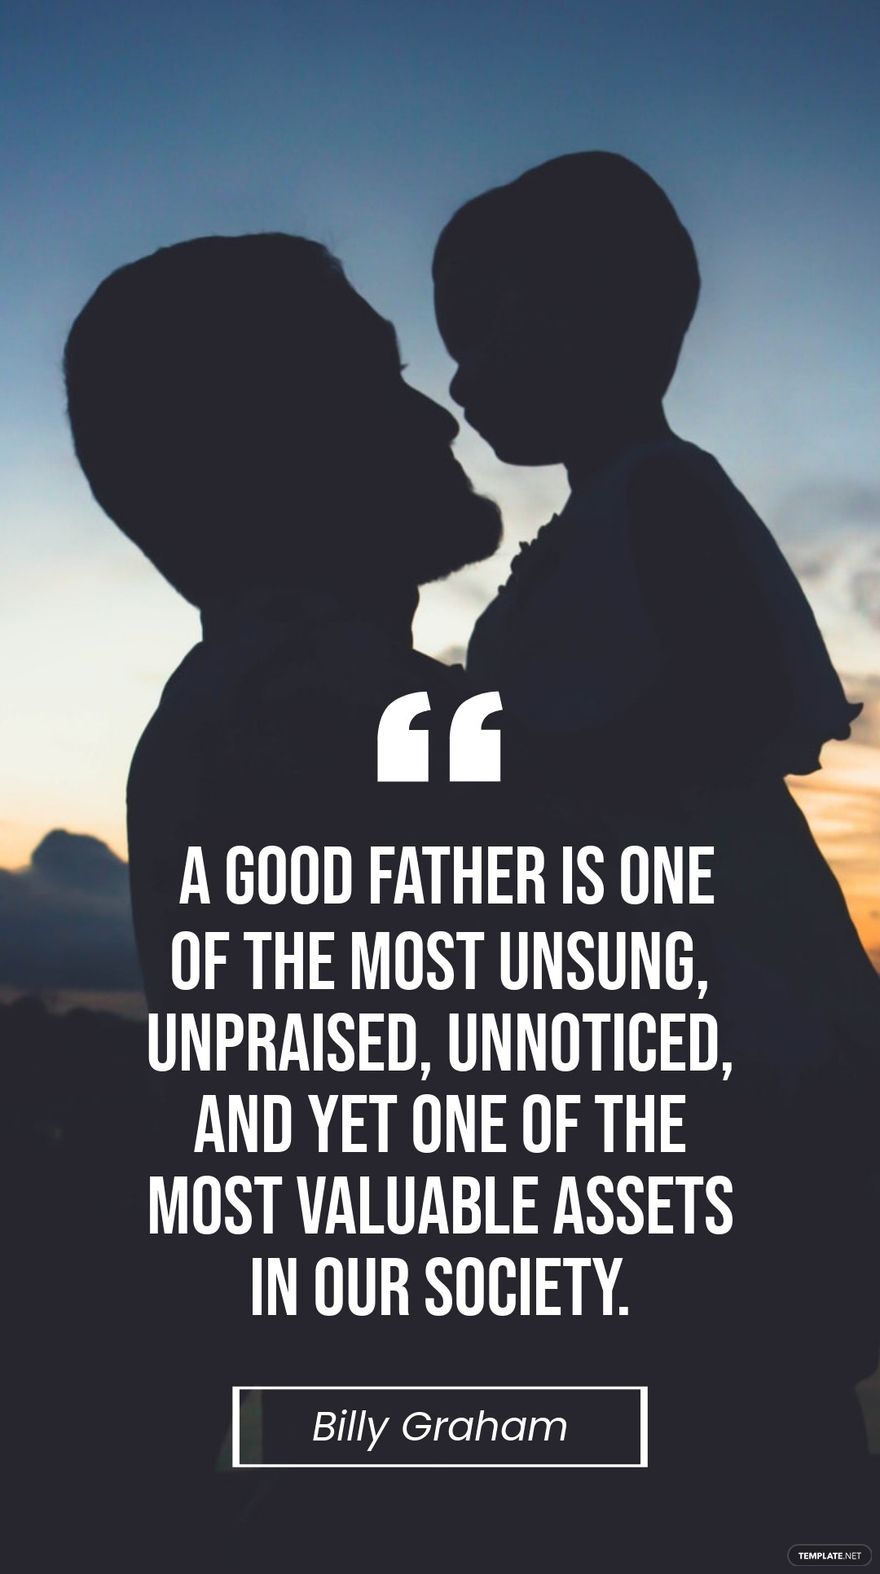 Billy Graham - A good father is one of the most unsung, unpraised, unnoticed, and yet one of the most valuable assets in our society.